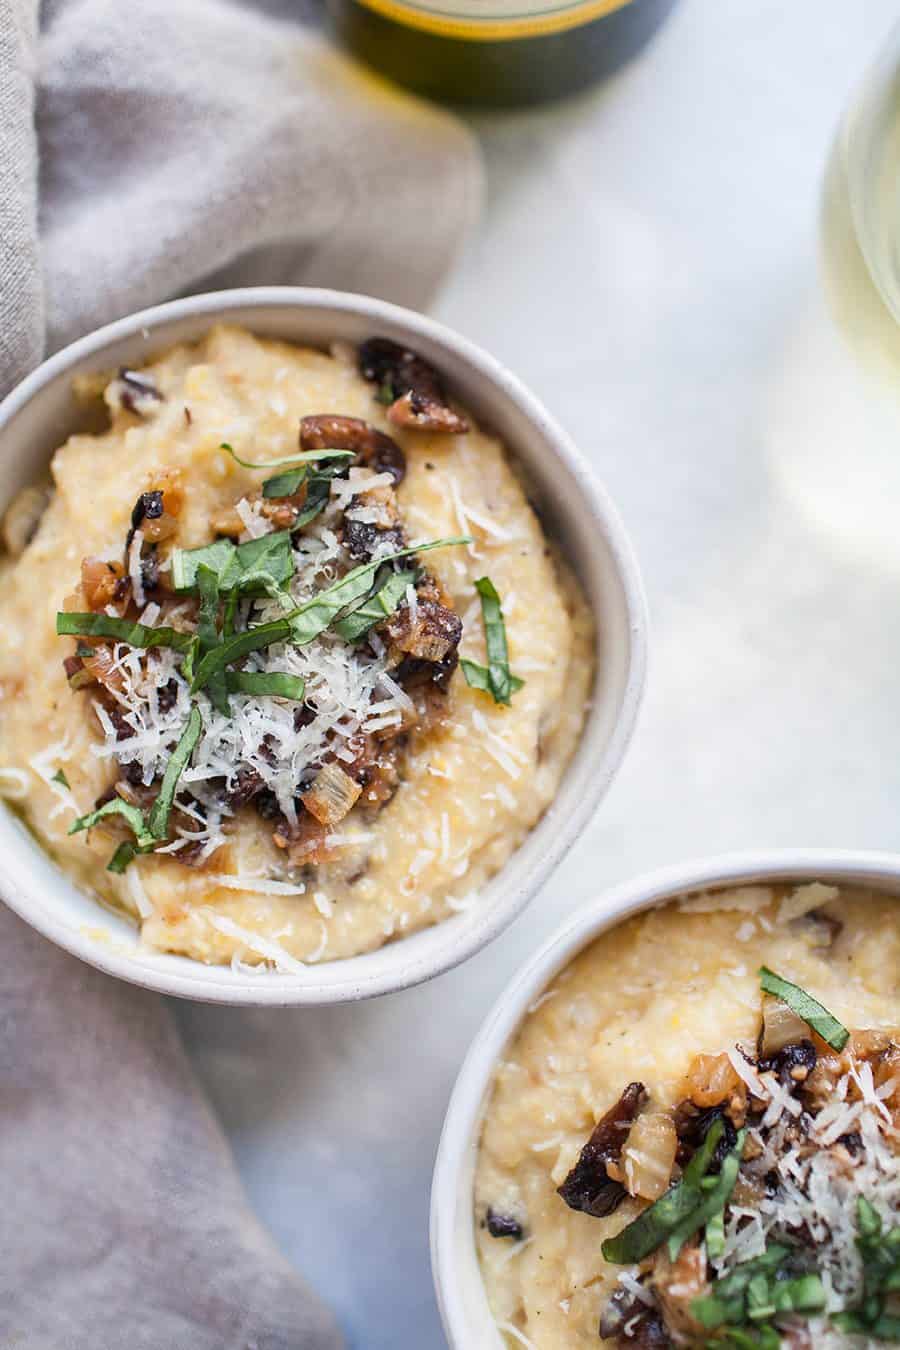 When you need a side dish that pairs well with so many entrees and will be the star of the dinner table, this creamy roasted mushroom fennel polenta is definitely your best choice! The combination of flavors from roasted mushrooms, fennel and shallots paired with creamy polenta and a perfect balance of saltiness from freshly grated Pecorino Romano cheese gives this dish an explosion of flavor! There's no need to go out to a restaurant for this gourmet side dish, you can make it right in the comfort of your own home!?